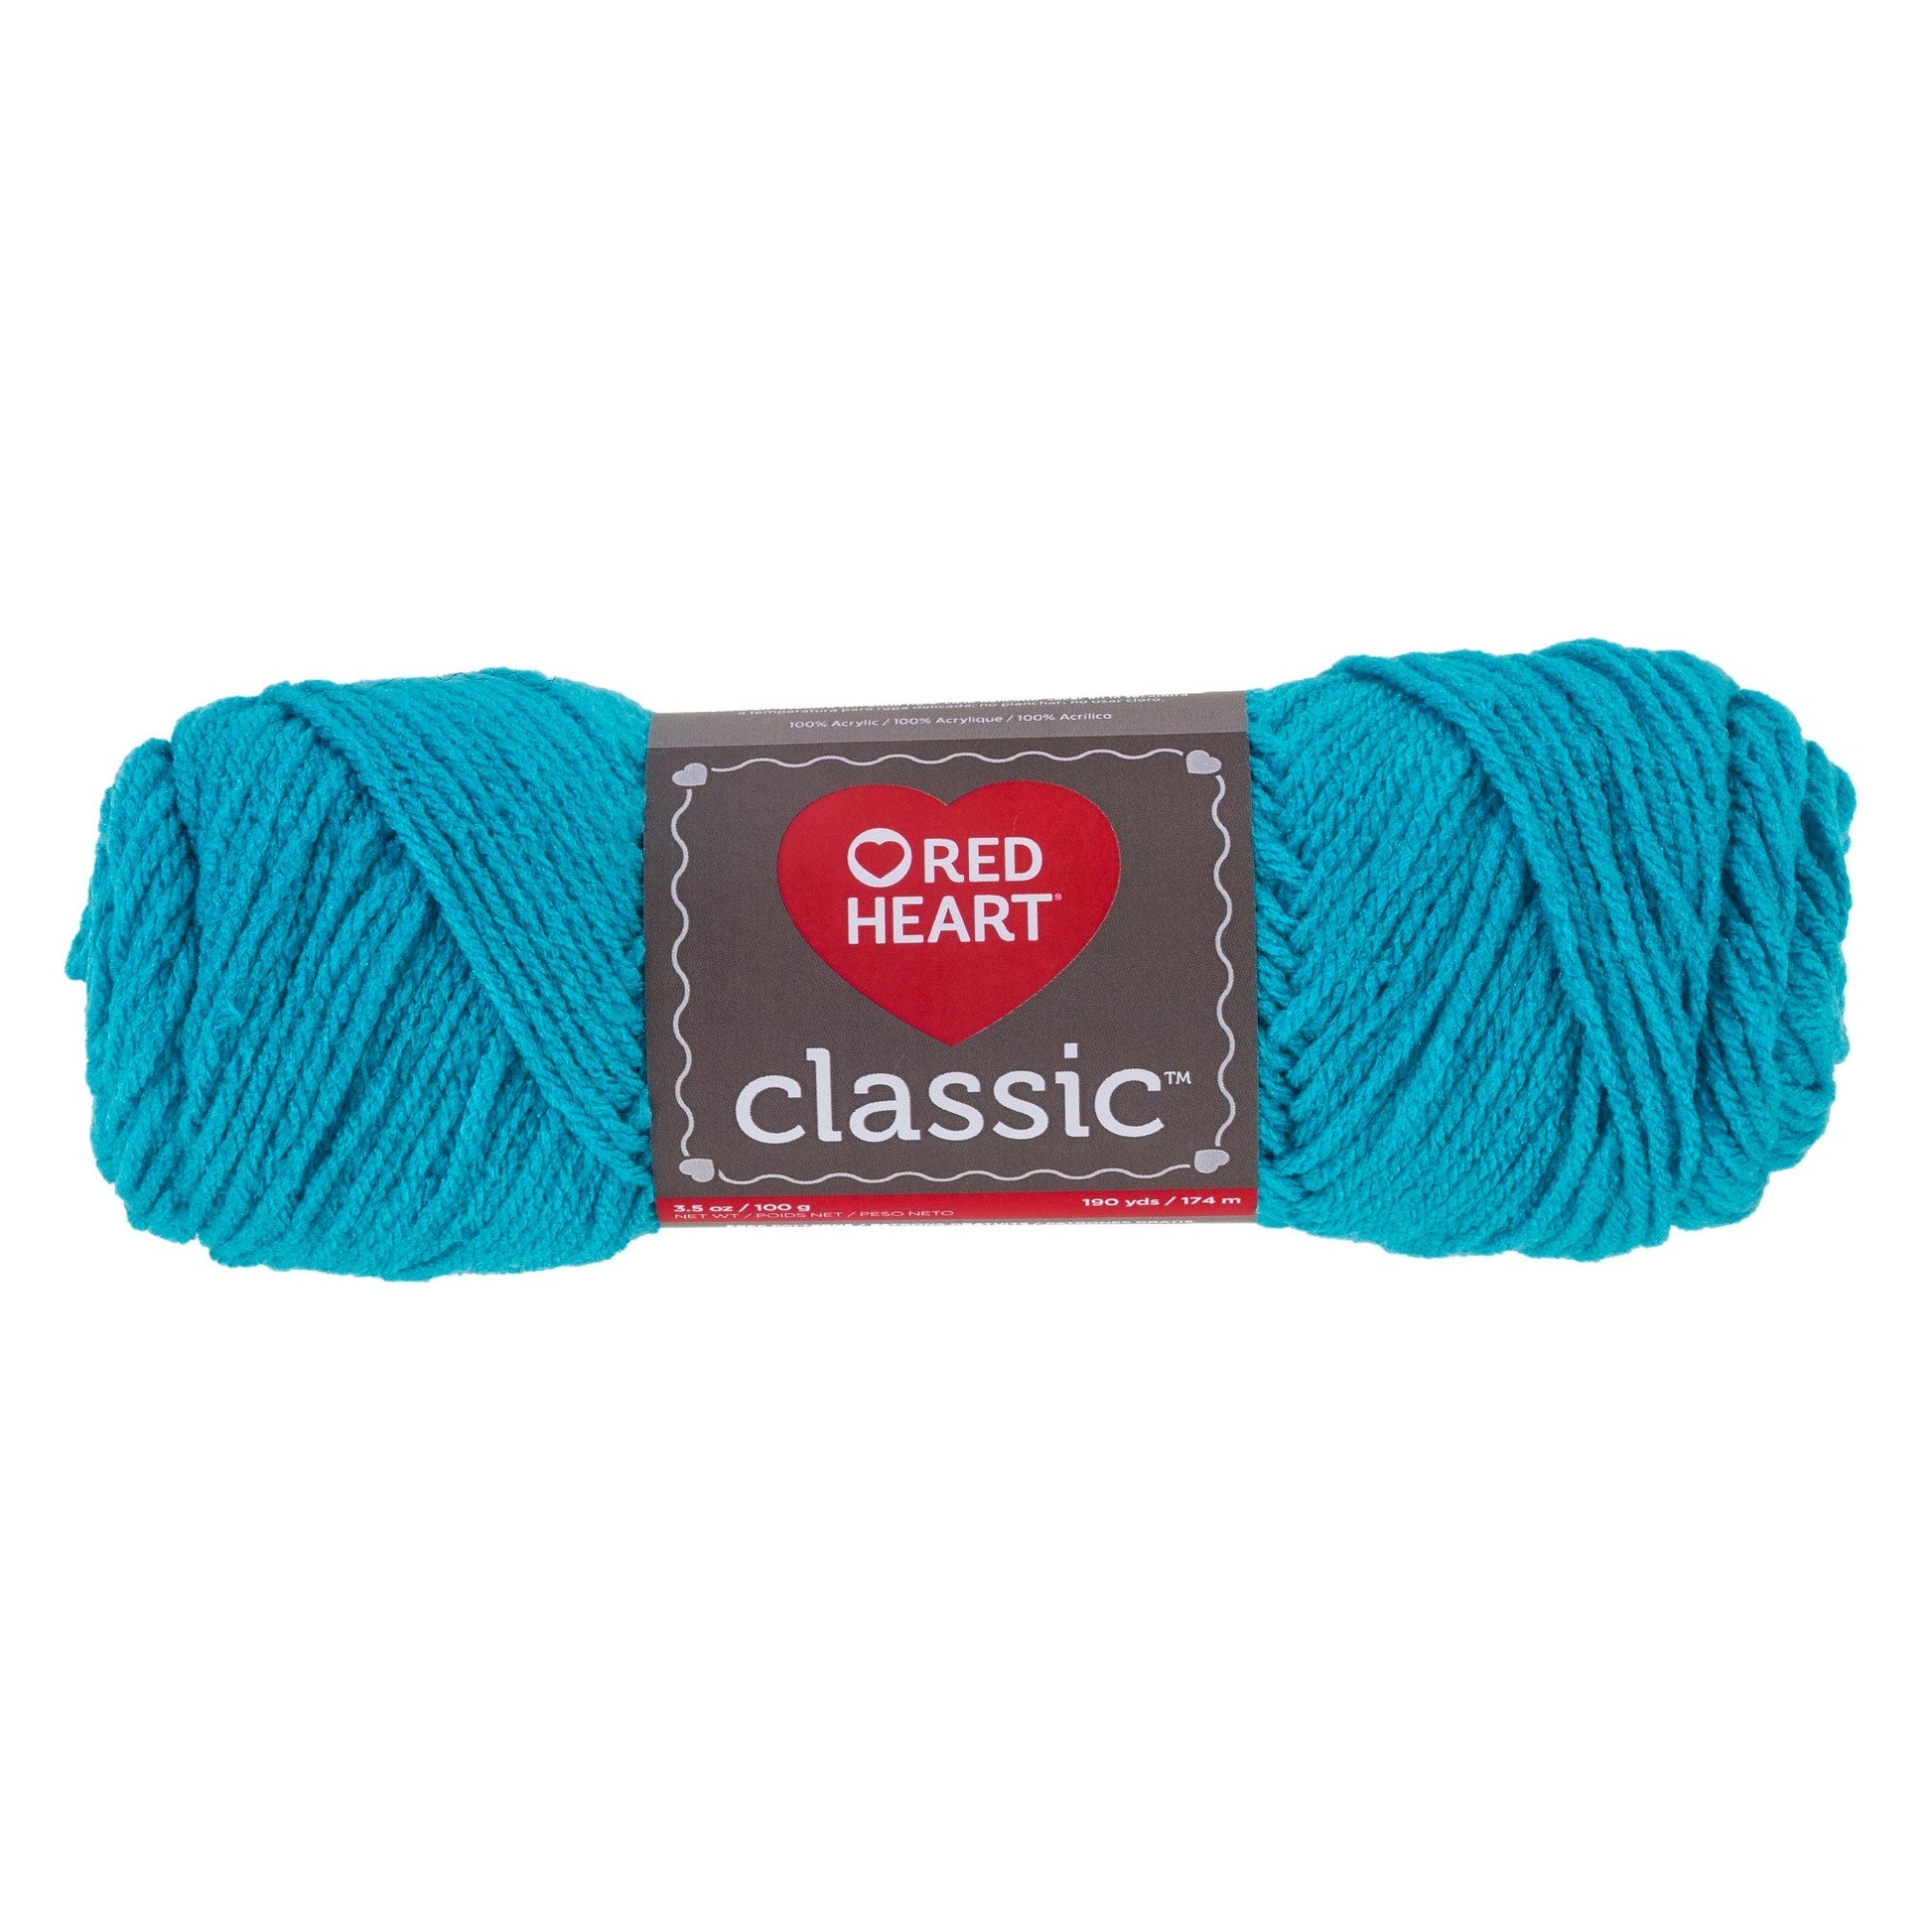 Red Heart Classic Yarn - Clearance shades Parakeet